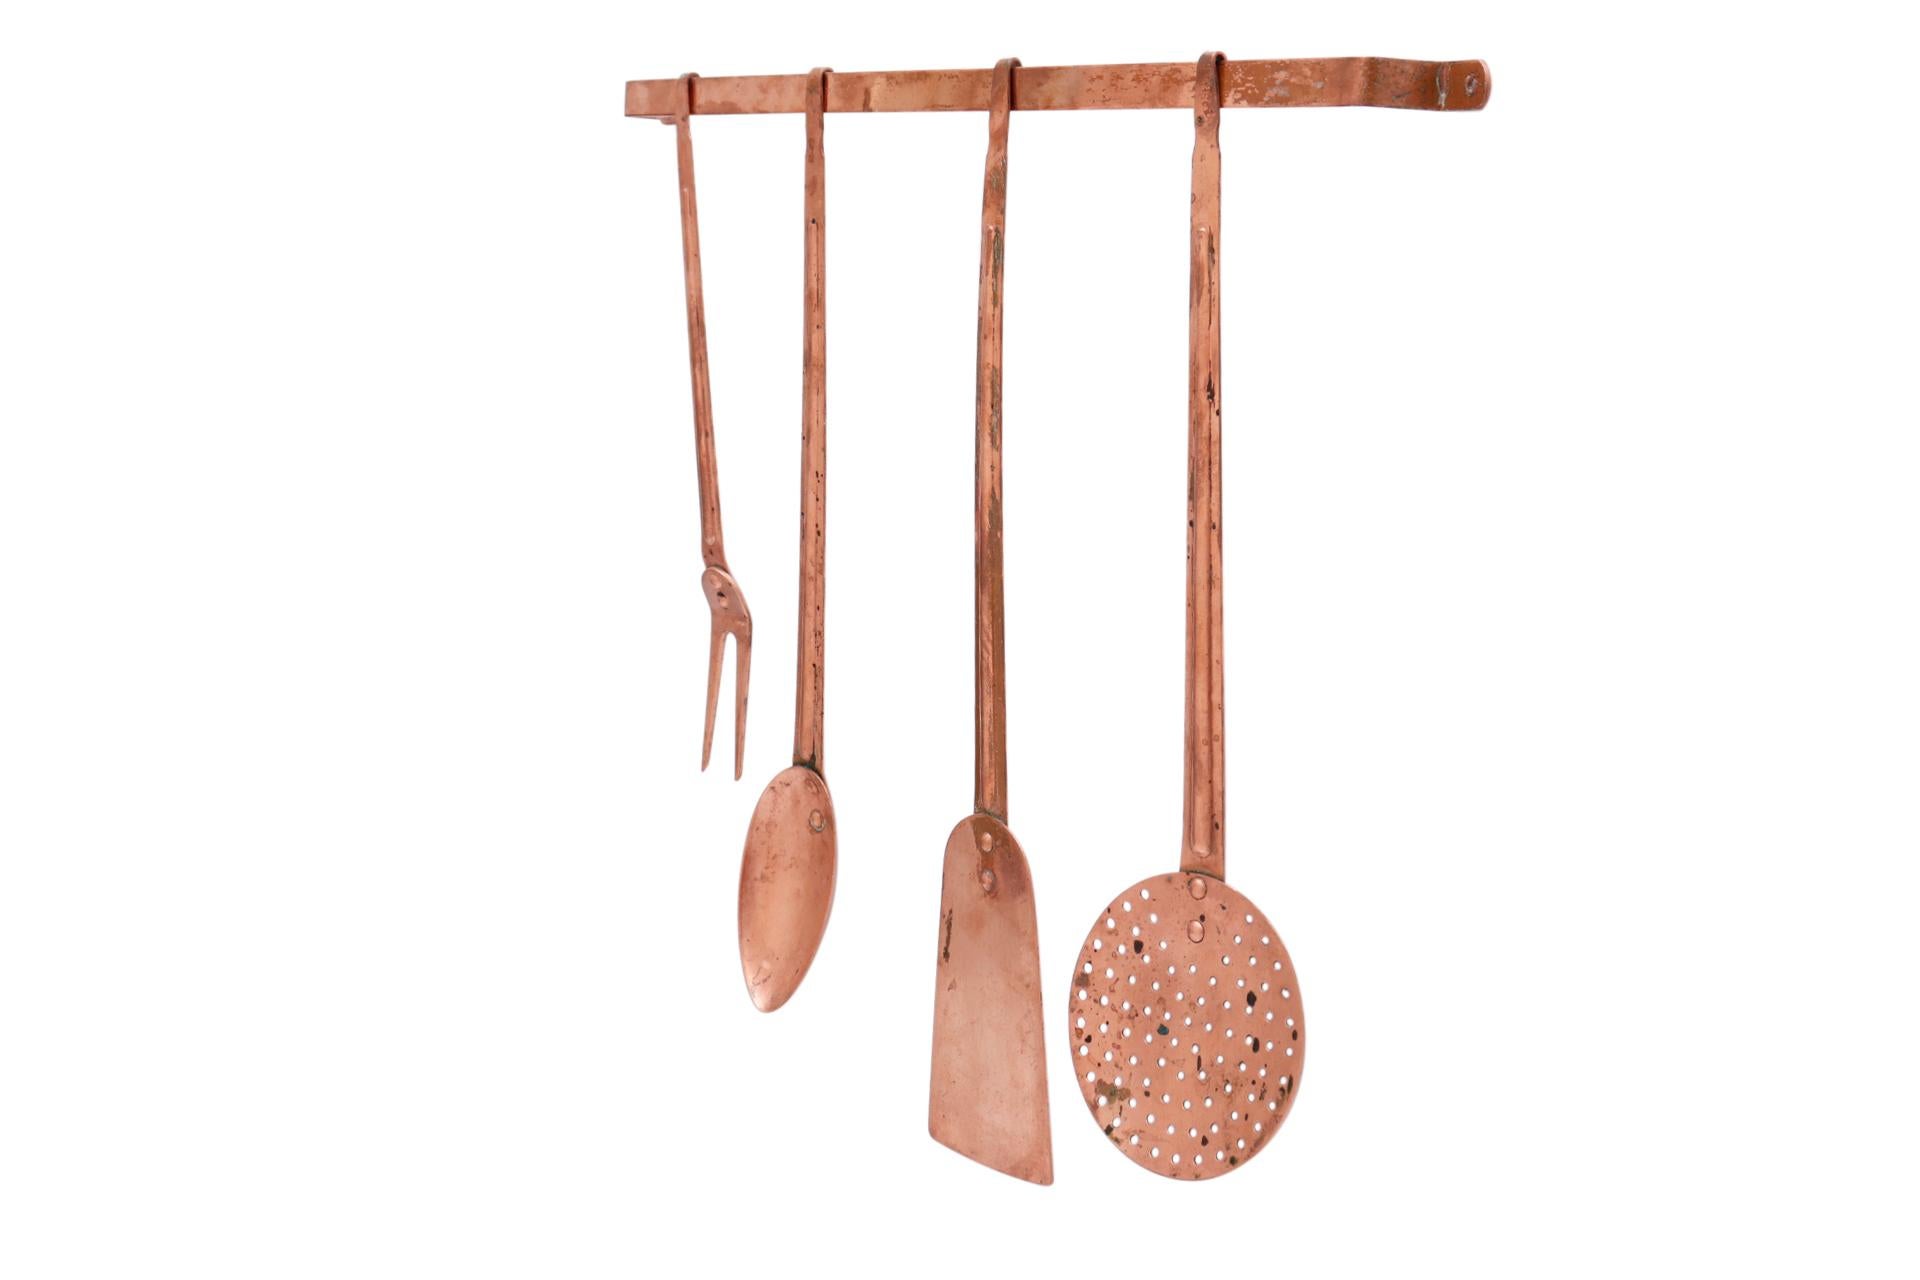 A set of four copper kitchen utensils and support bar, all marked Made in Portugal. Includes a large spoon and fork, spatula and mesh skimmer.